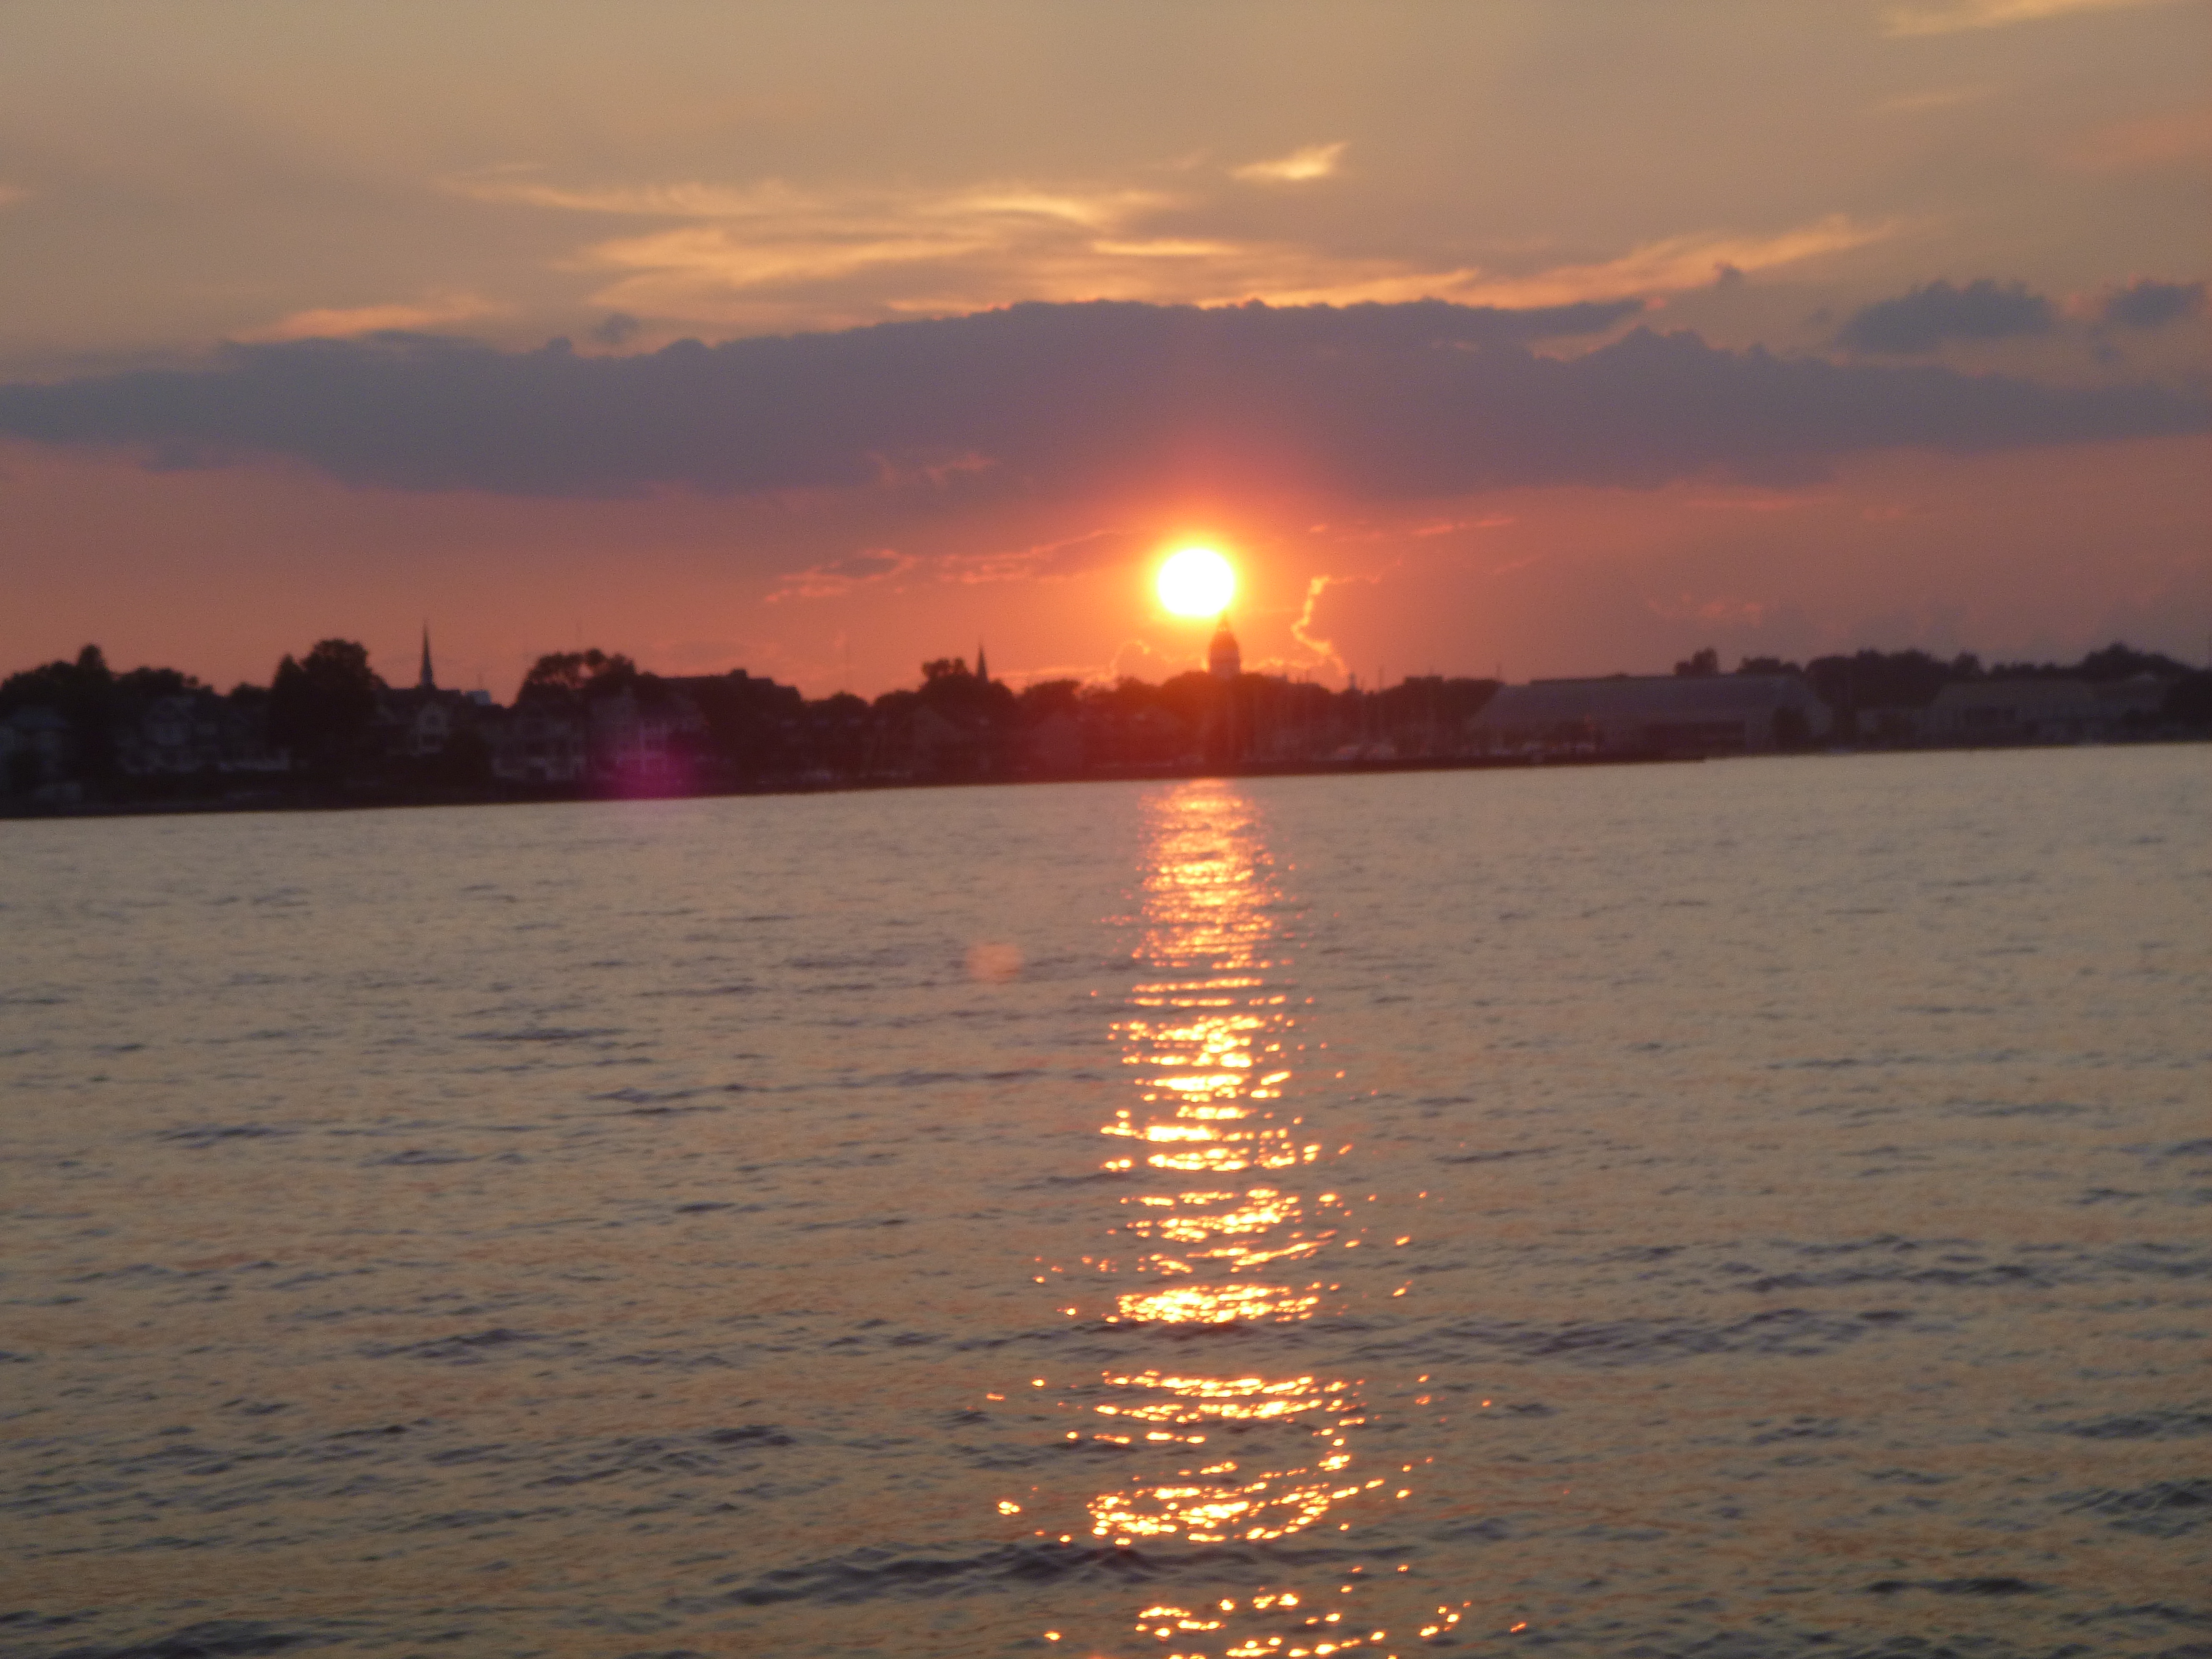 Sunset over Annapolis,Md. from Schooner Woodwind on 7.29.12